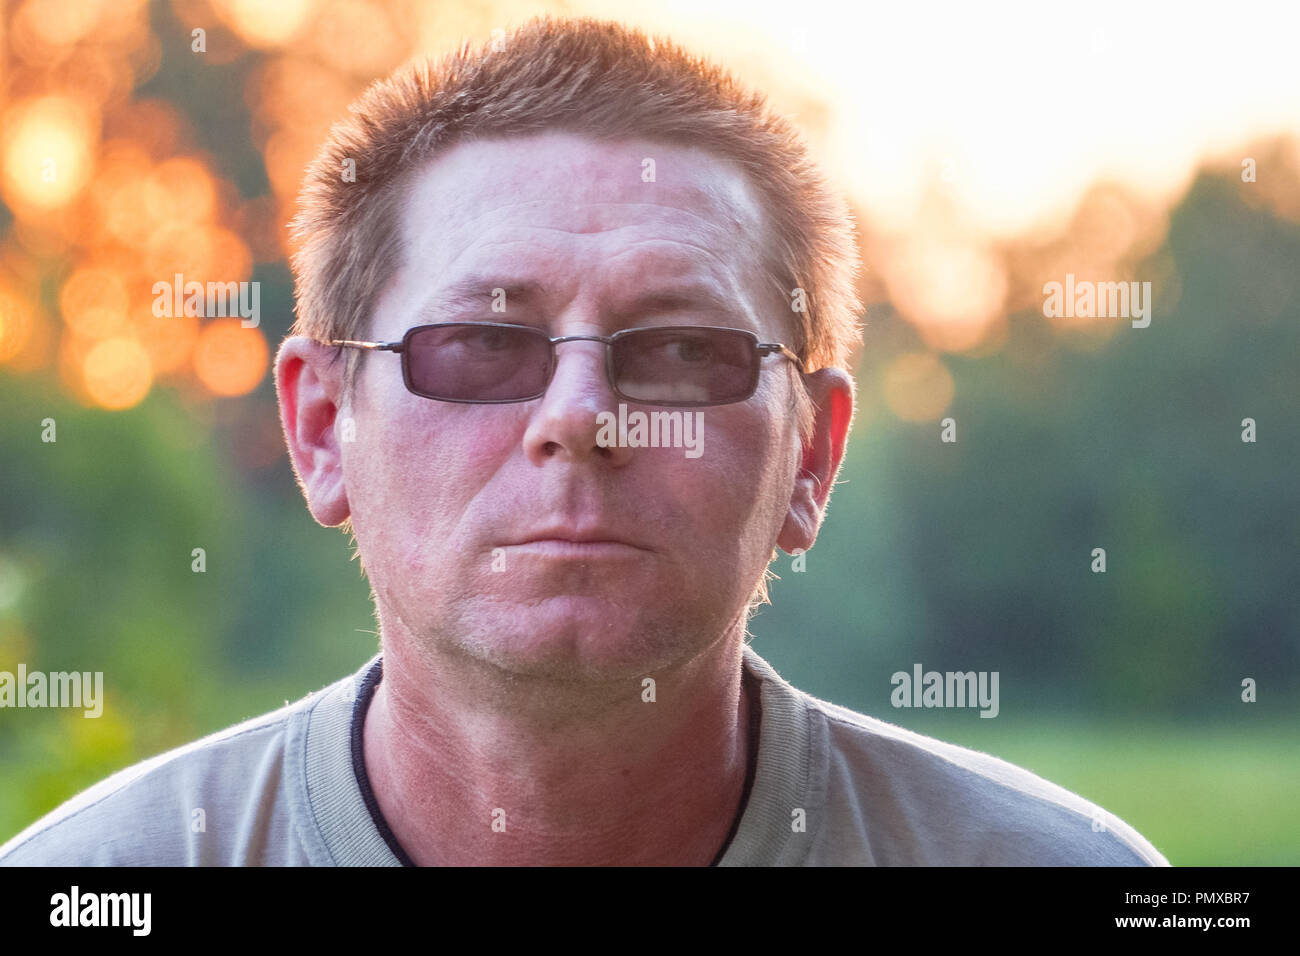 Portrait of a man in dark glasses with sloppy hair Stock Photo